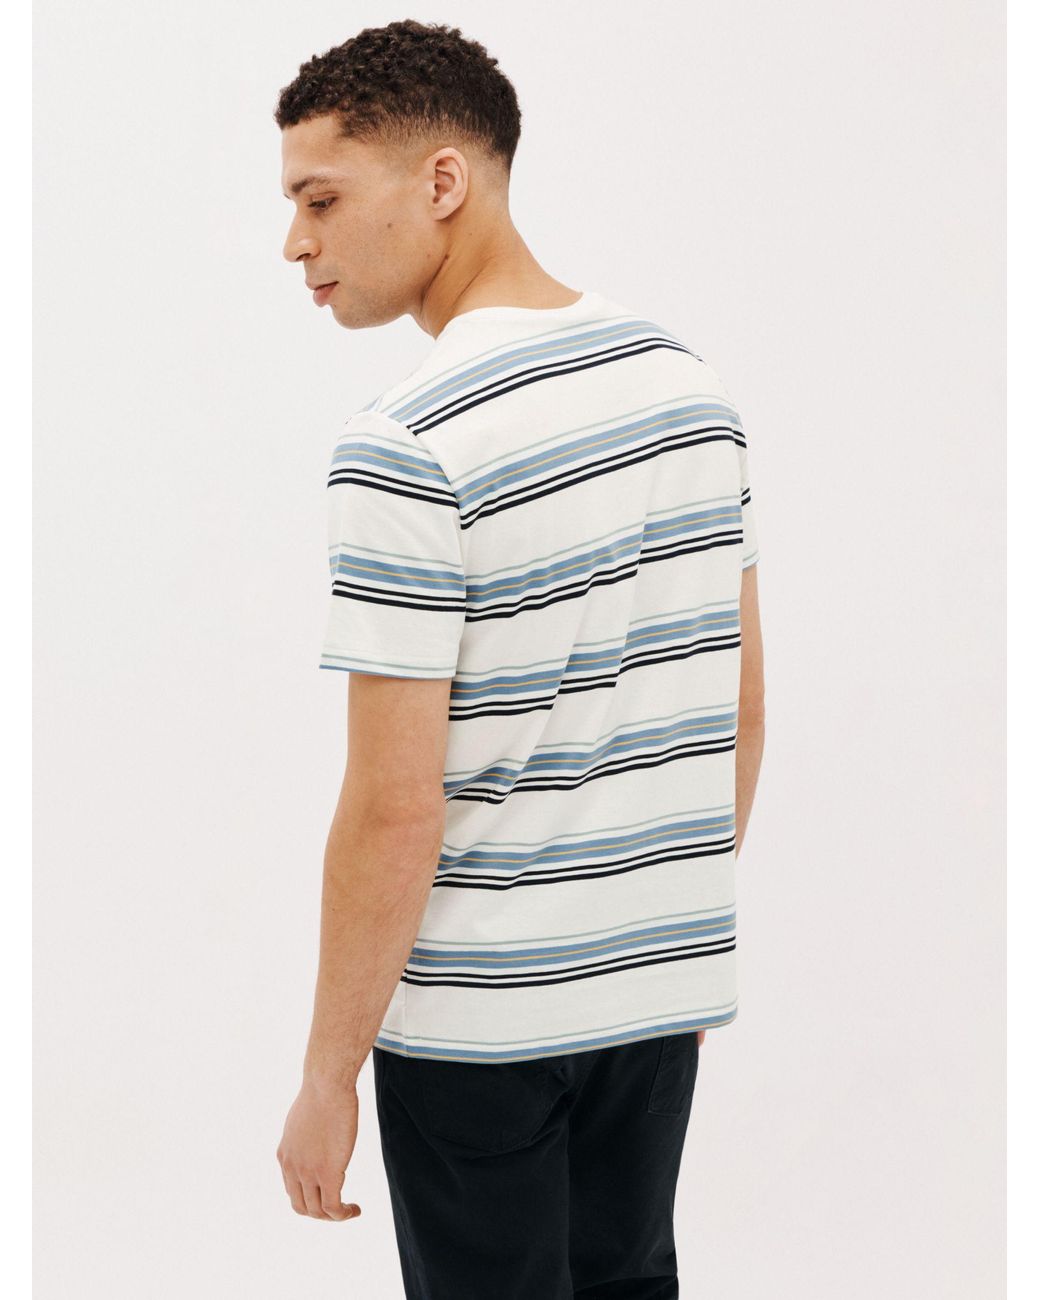 Fred Perry Stripe Crew Neck T-shirt in Grey for Men | Lyst UK